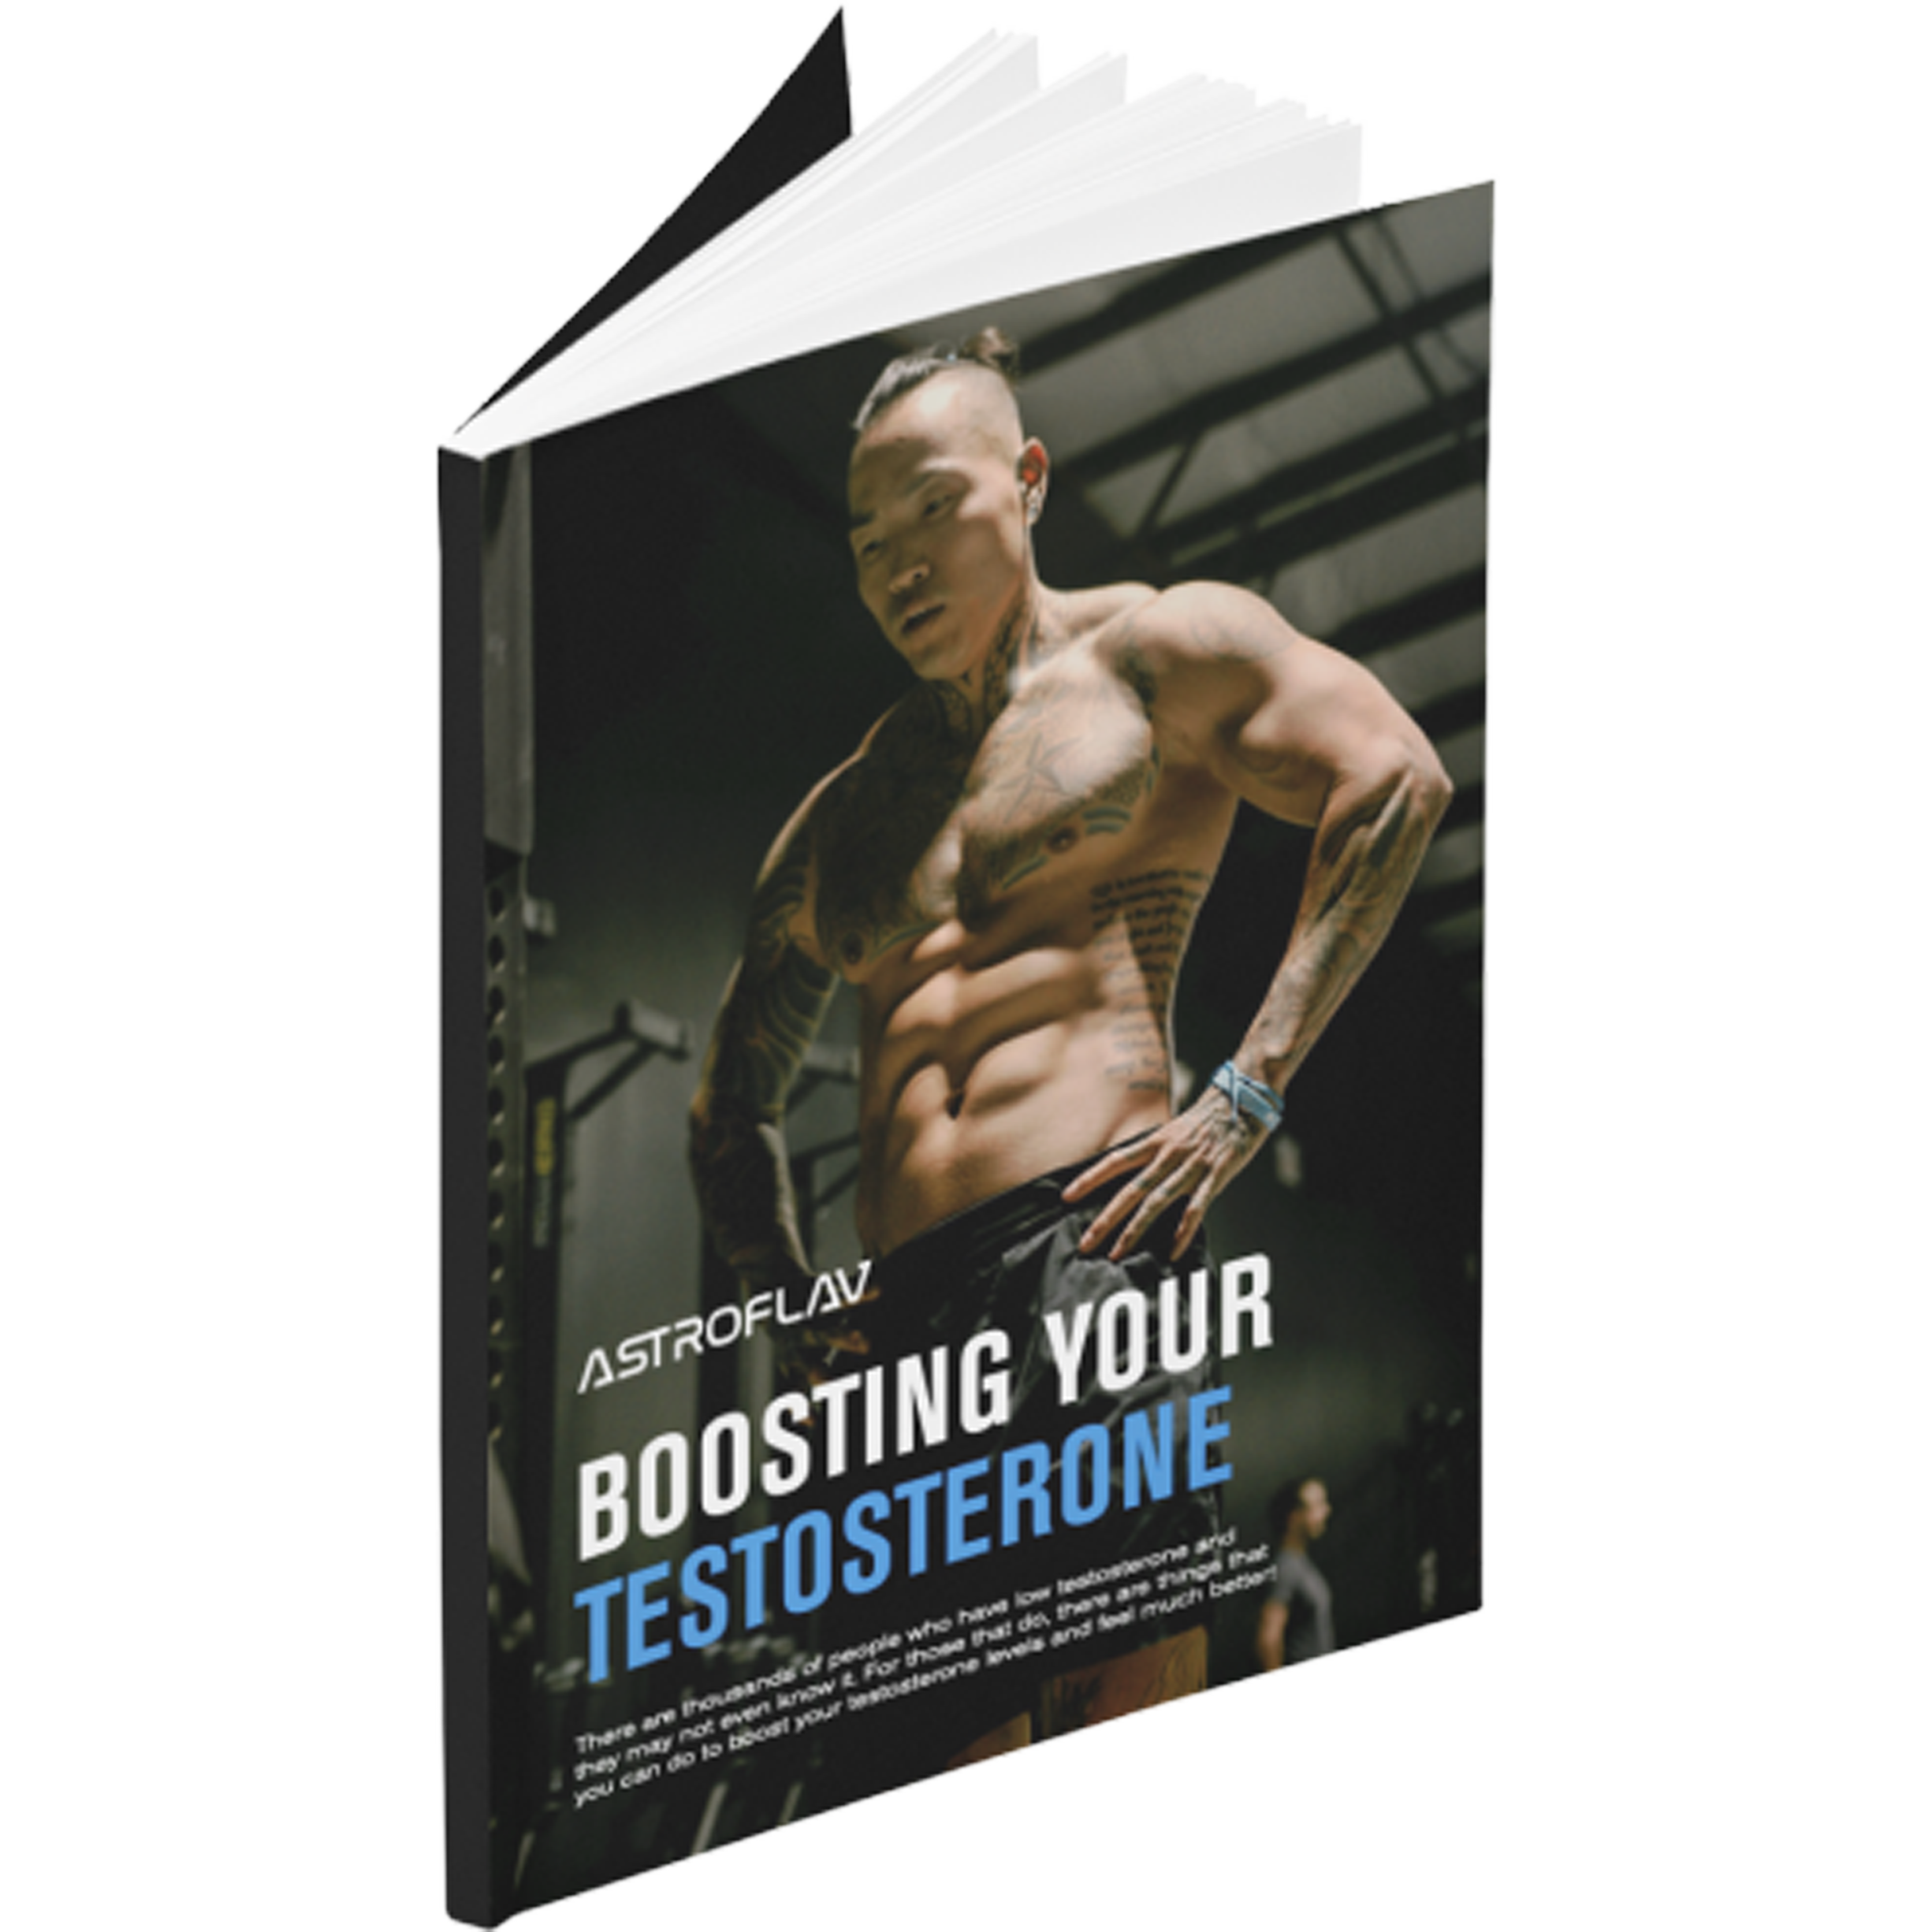 Boosting Your Testosterone Playbook